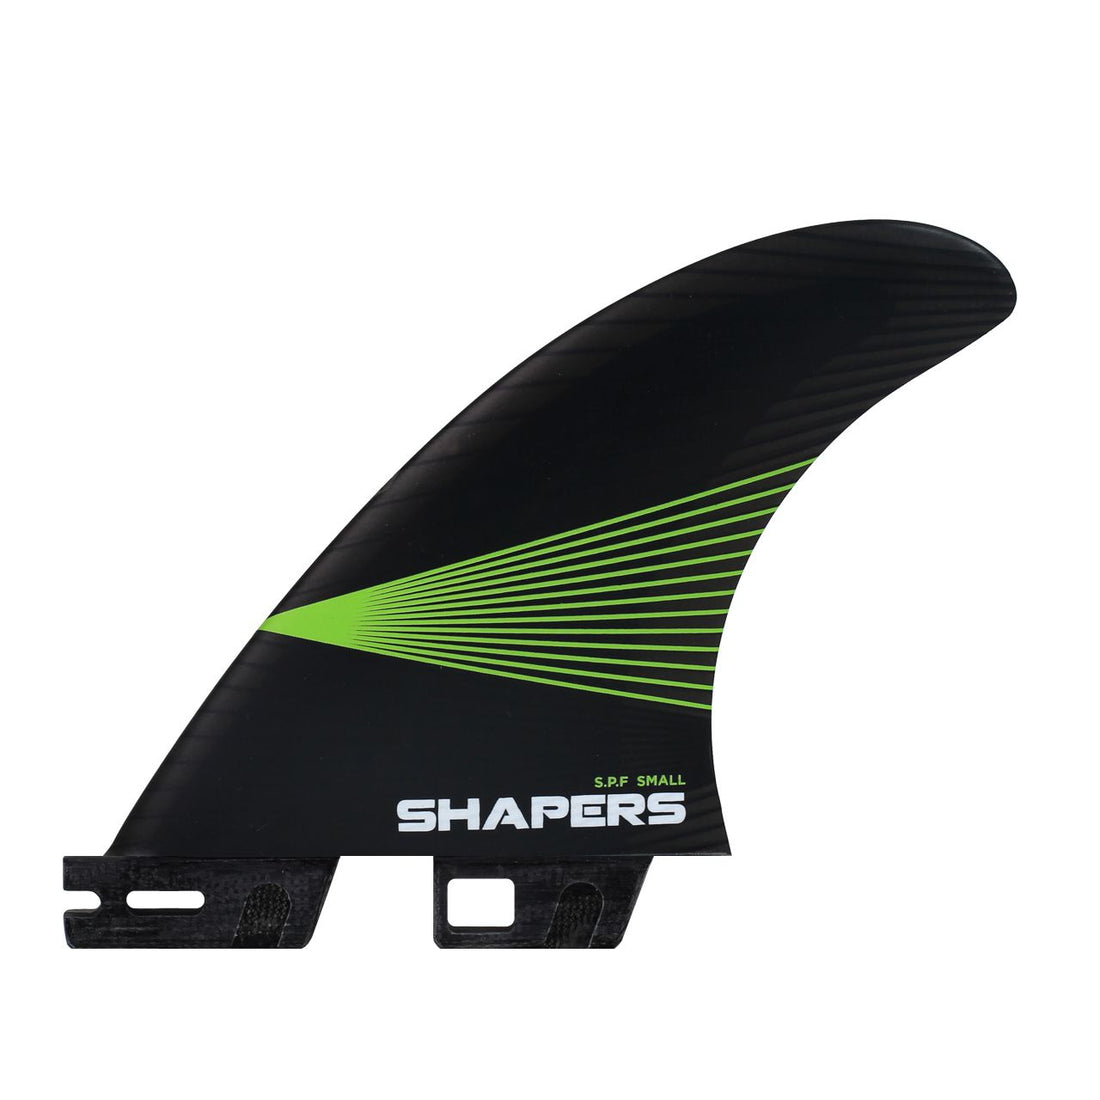 SHAPERS S.P.F AIRLITE SMALL 3-FIN SHAPERS 2 TAB